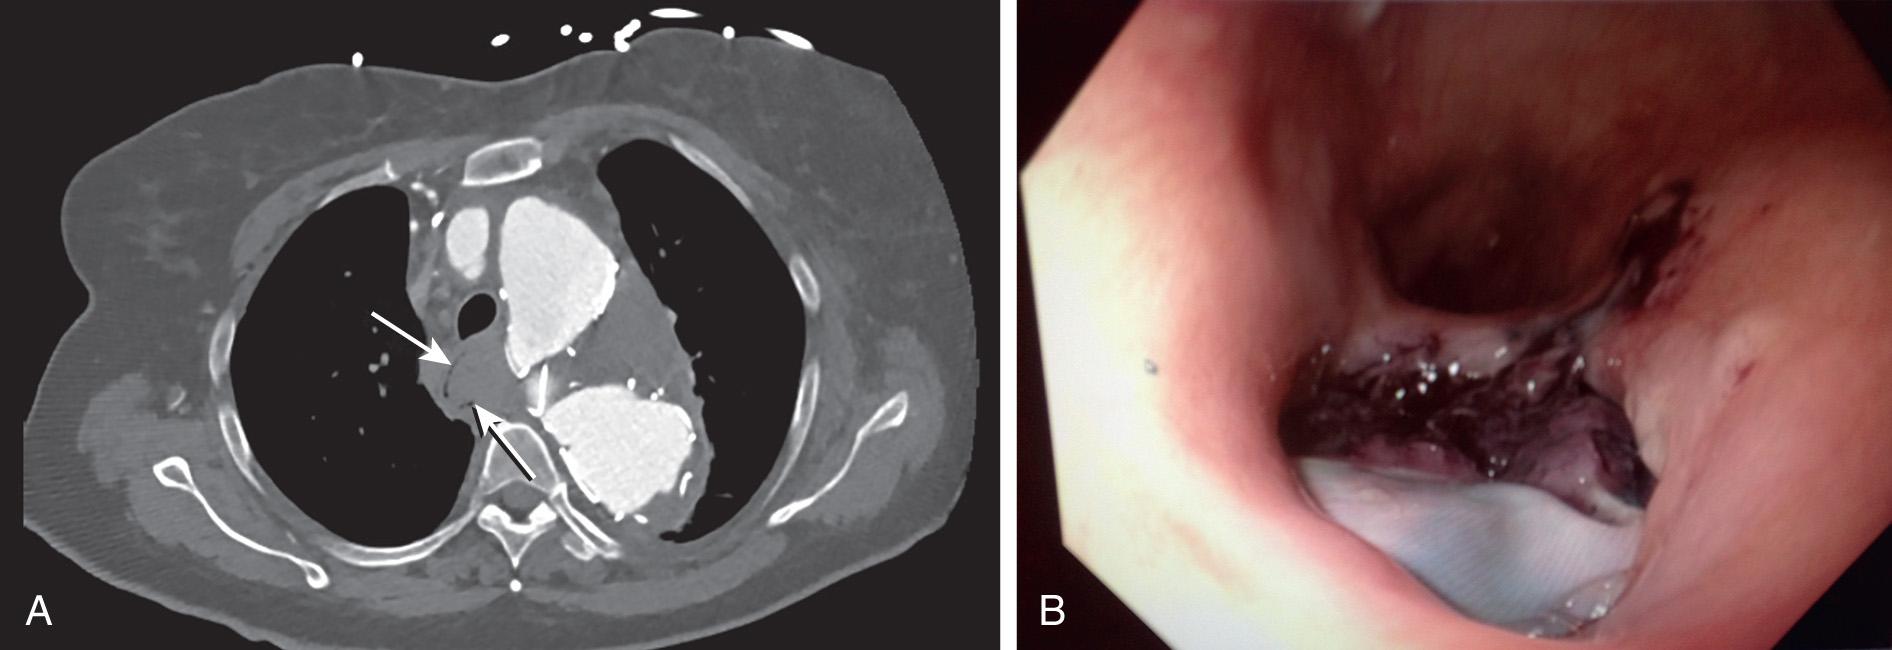 FIGURE 88.4, (A) A 78-year-old female underwent thoracic endovascular aneurysm repair and presented less than 2 years later with a low-volume gastrointestinal bleed. Computed tomography scan revealed a type 1 endoleak, aneurysm sac expansion, and suspicion for esophageal erosion. Arrows denote esophageal lumen impinged upon by inflammatory tissue and clot. (B) Upper endoscopy revealed a proximal esophageal ulcer with graft visible in the ulcer. Due to the patient's frailty, she was not a candidate for explant and aortic arch/esophageal reconstructions. She was treated with a carotid-carotid bypass, a midarch thoracic endograft, an esophageal stent, and lifelong antibiotic suppression.